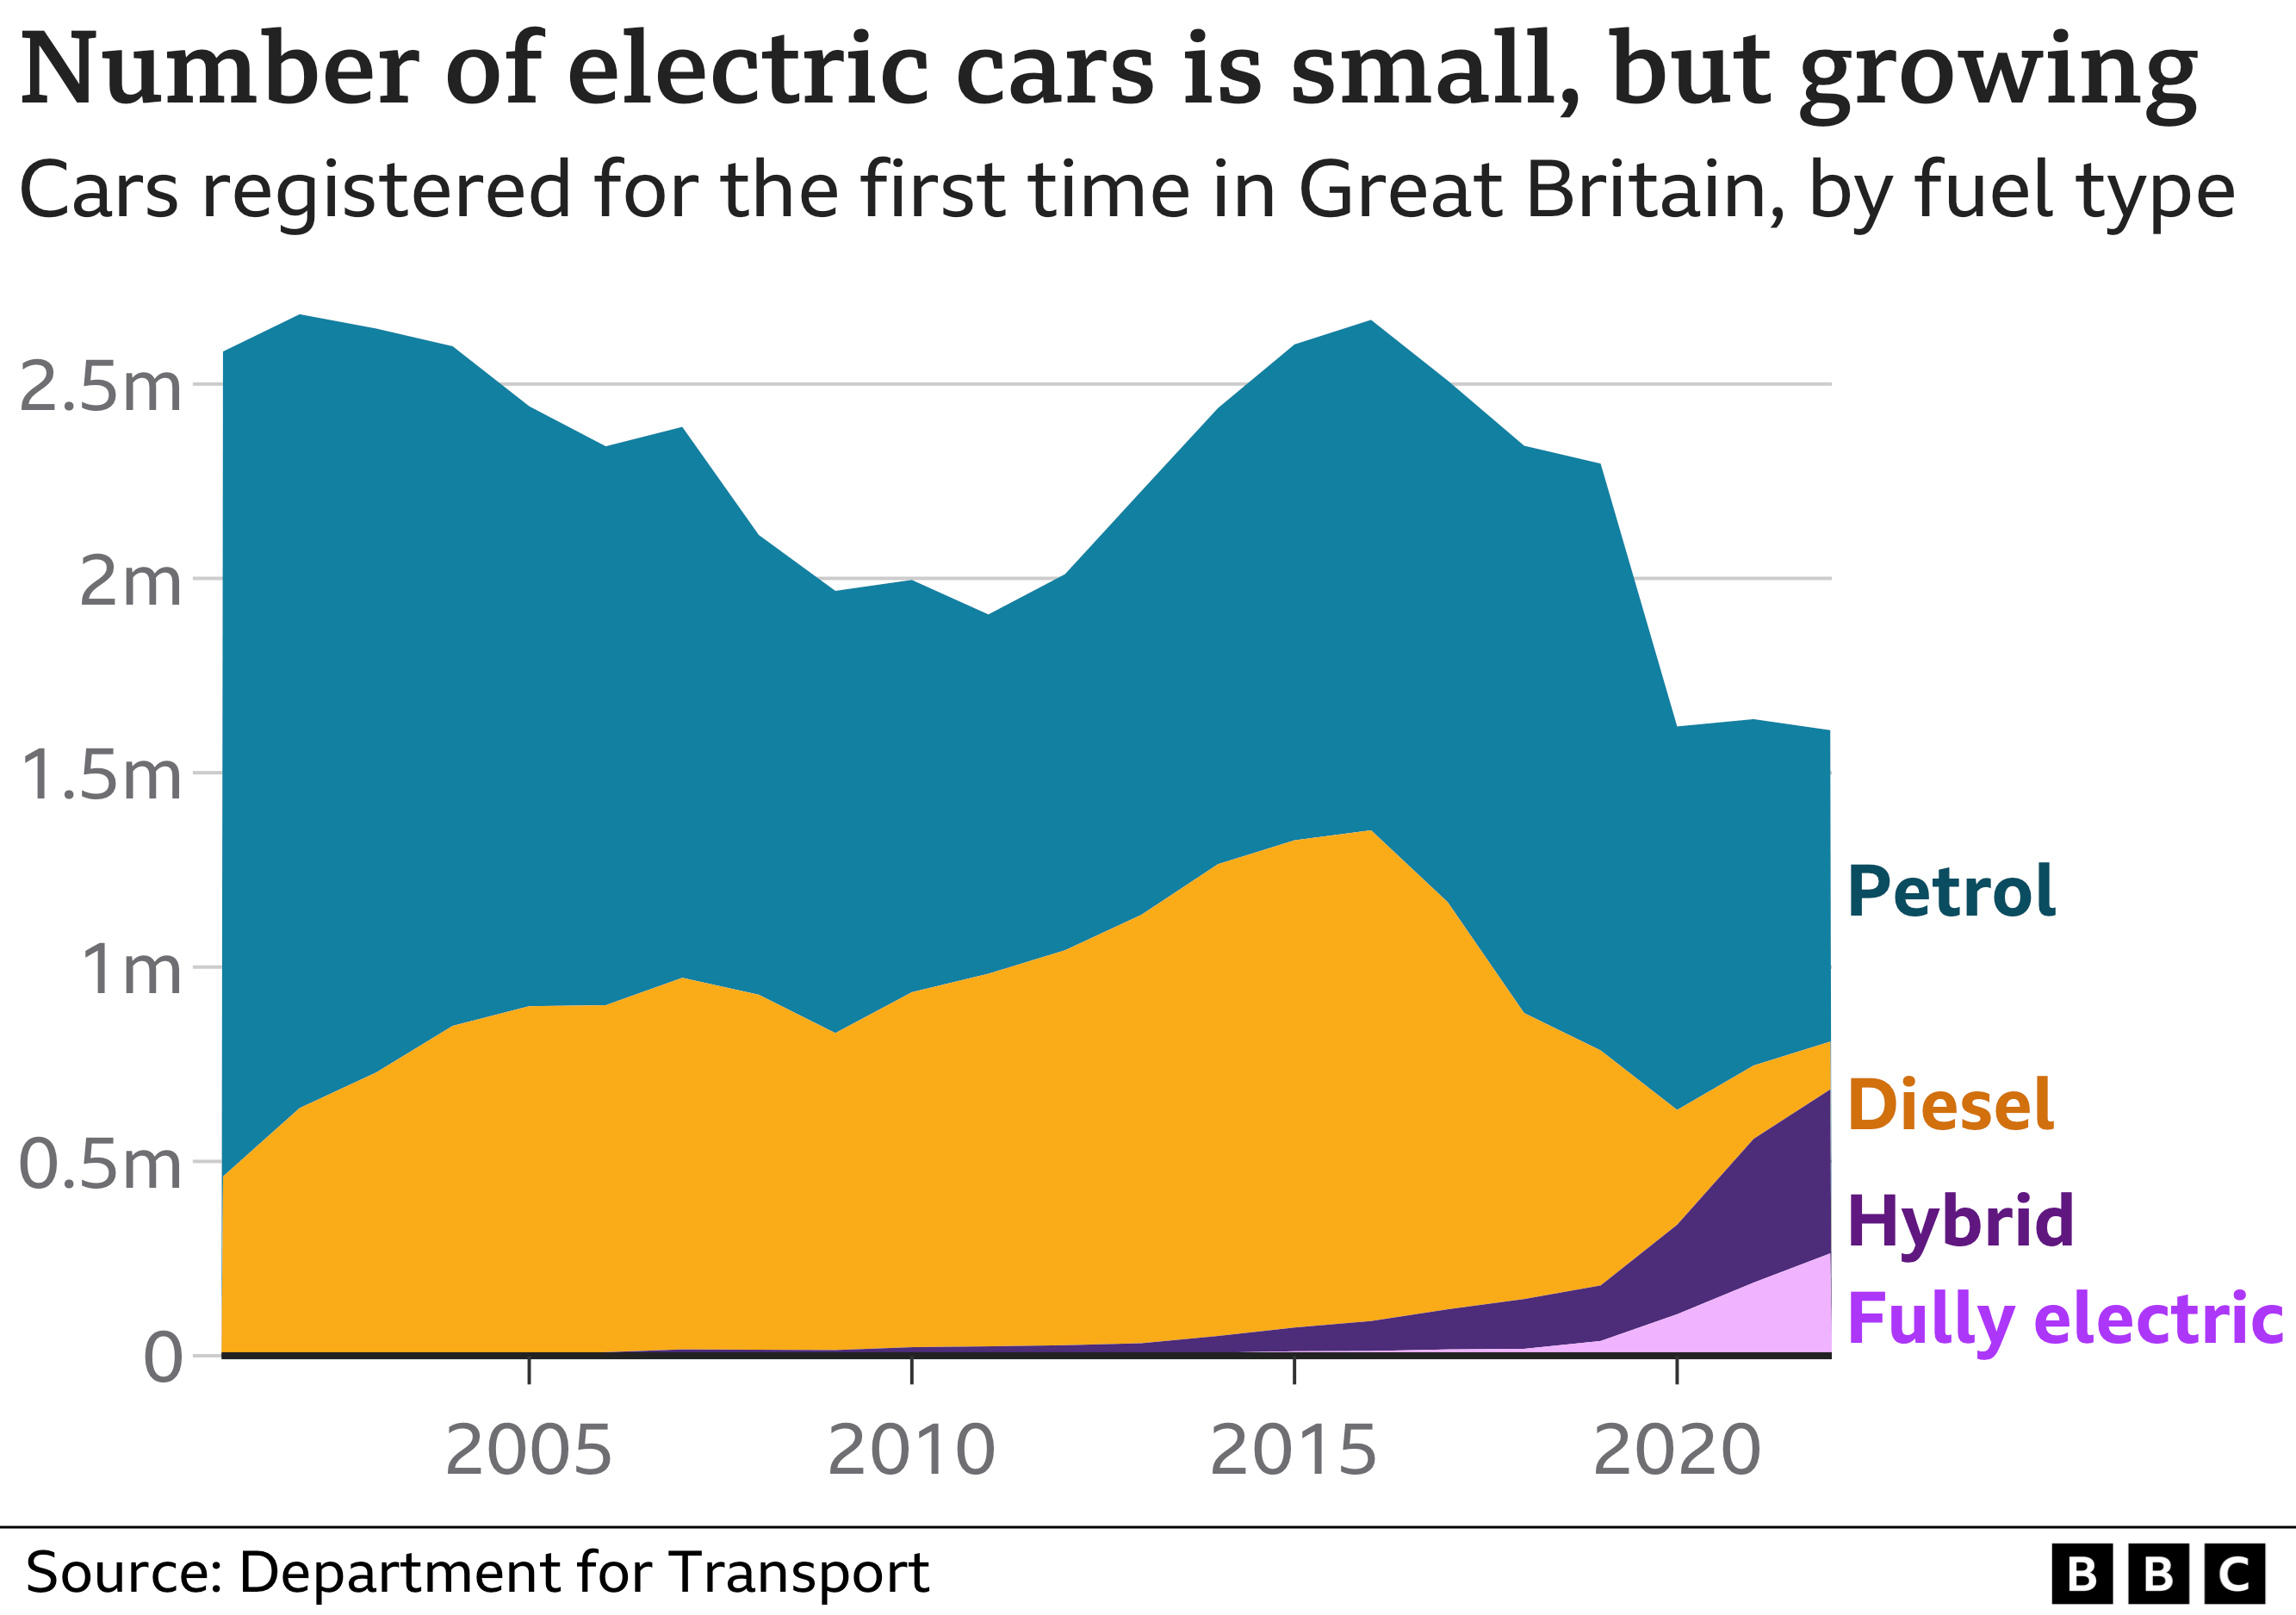 Fully electric and hybrid car sales have begun to grow more quickly in the last few years, although petrol sales remain higher. [June 2023]